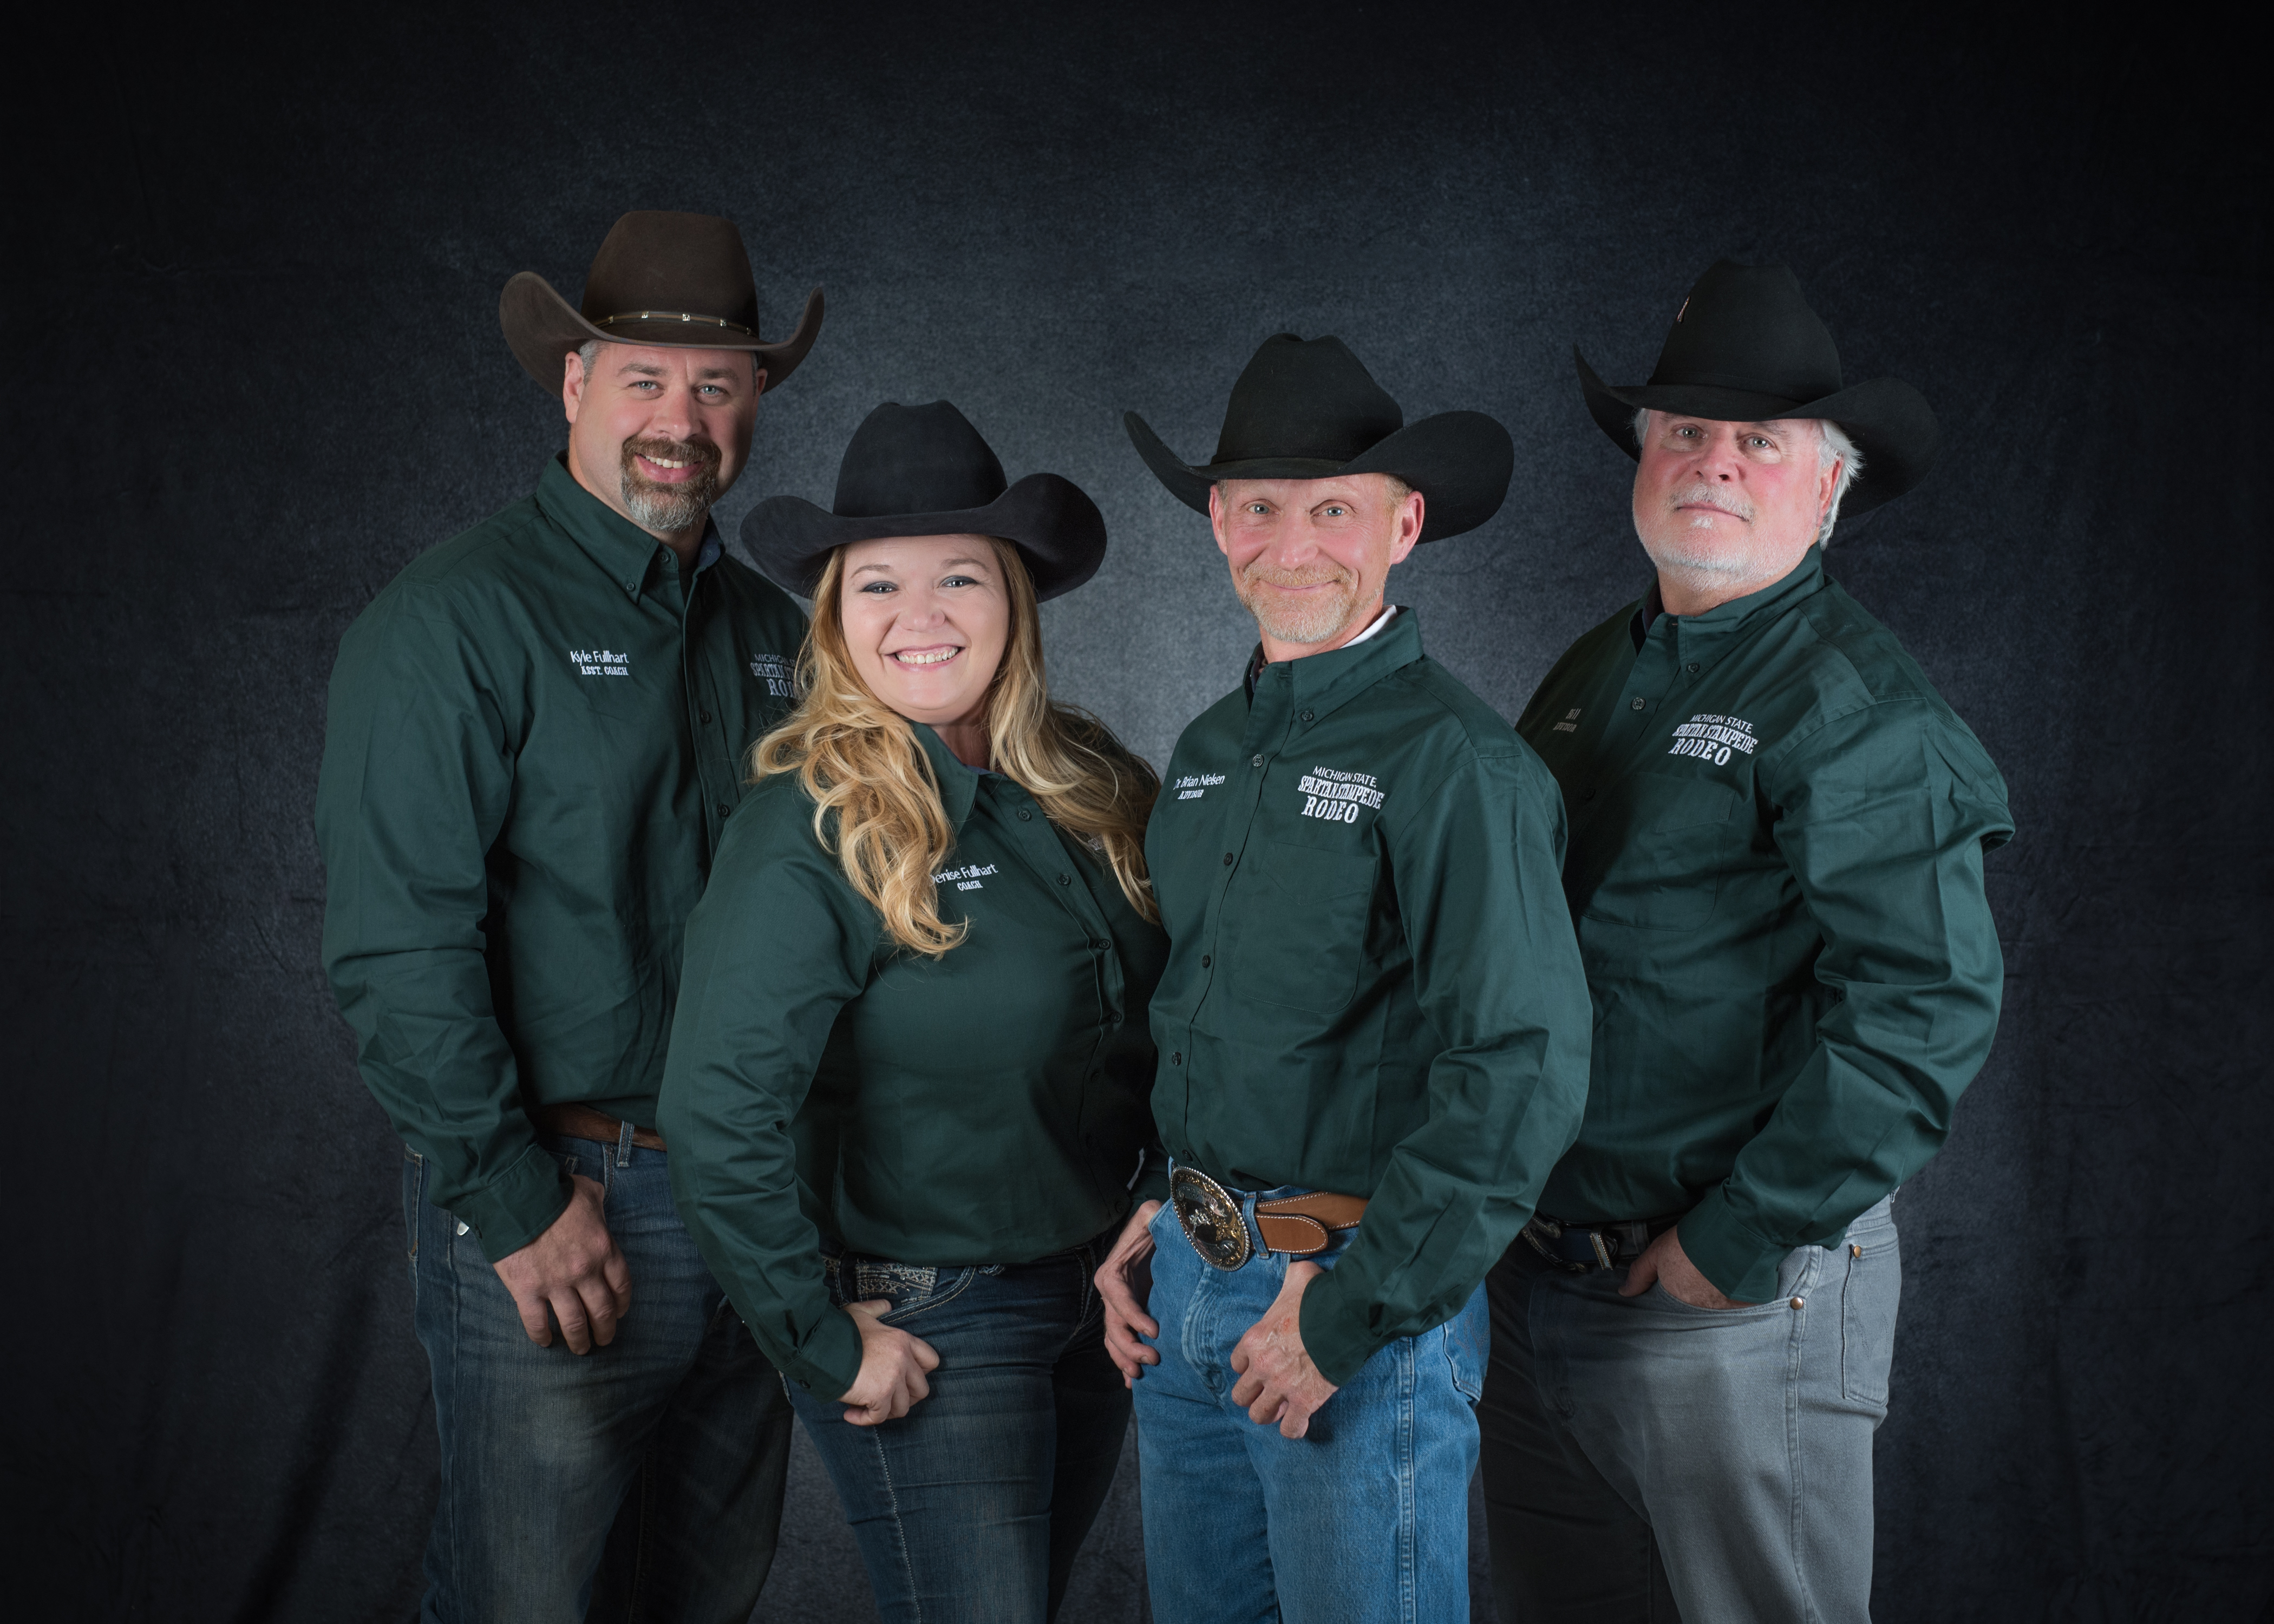 MSU Rodeo Club Advisors from left to right: Kyle Fullhart, Denise Fullhart, Dr. Brian Nielsen, and Bill Humphrey